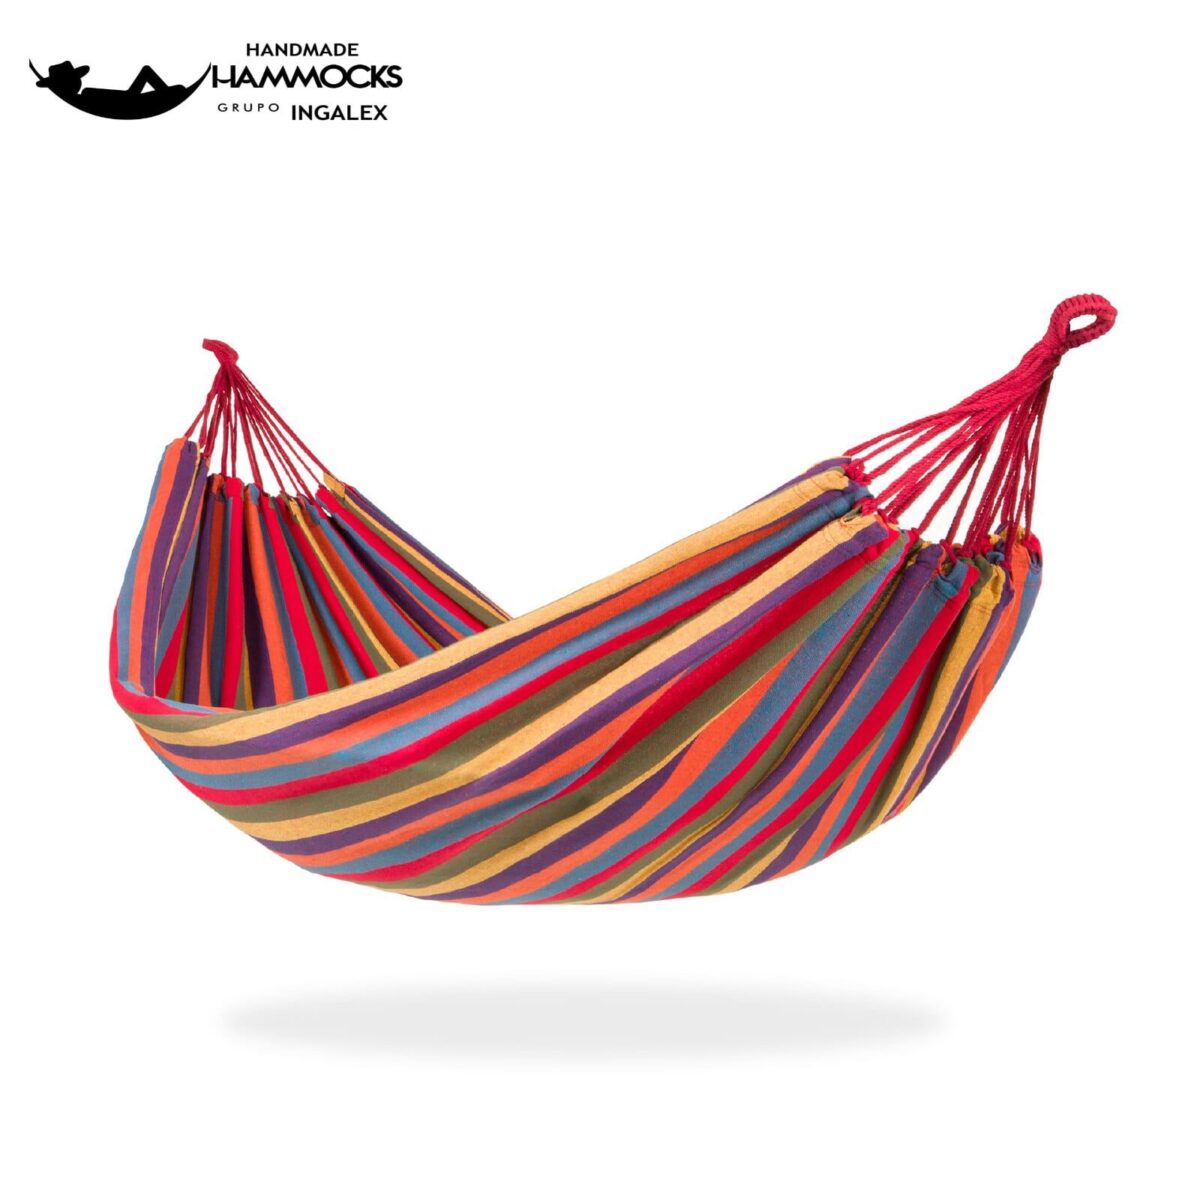 hammock with stand